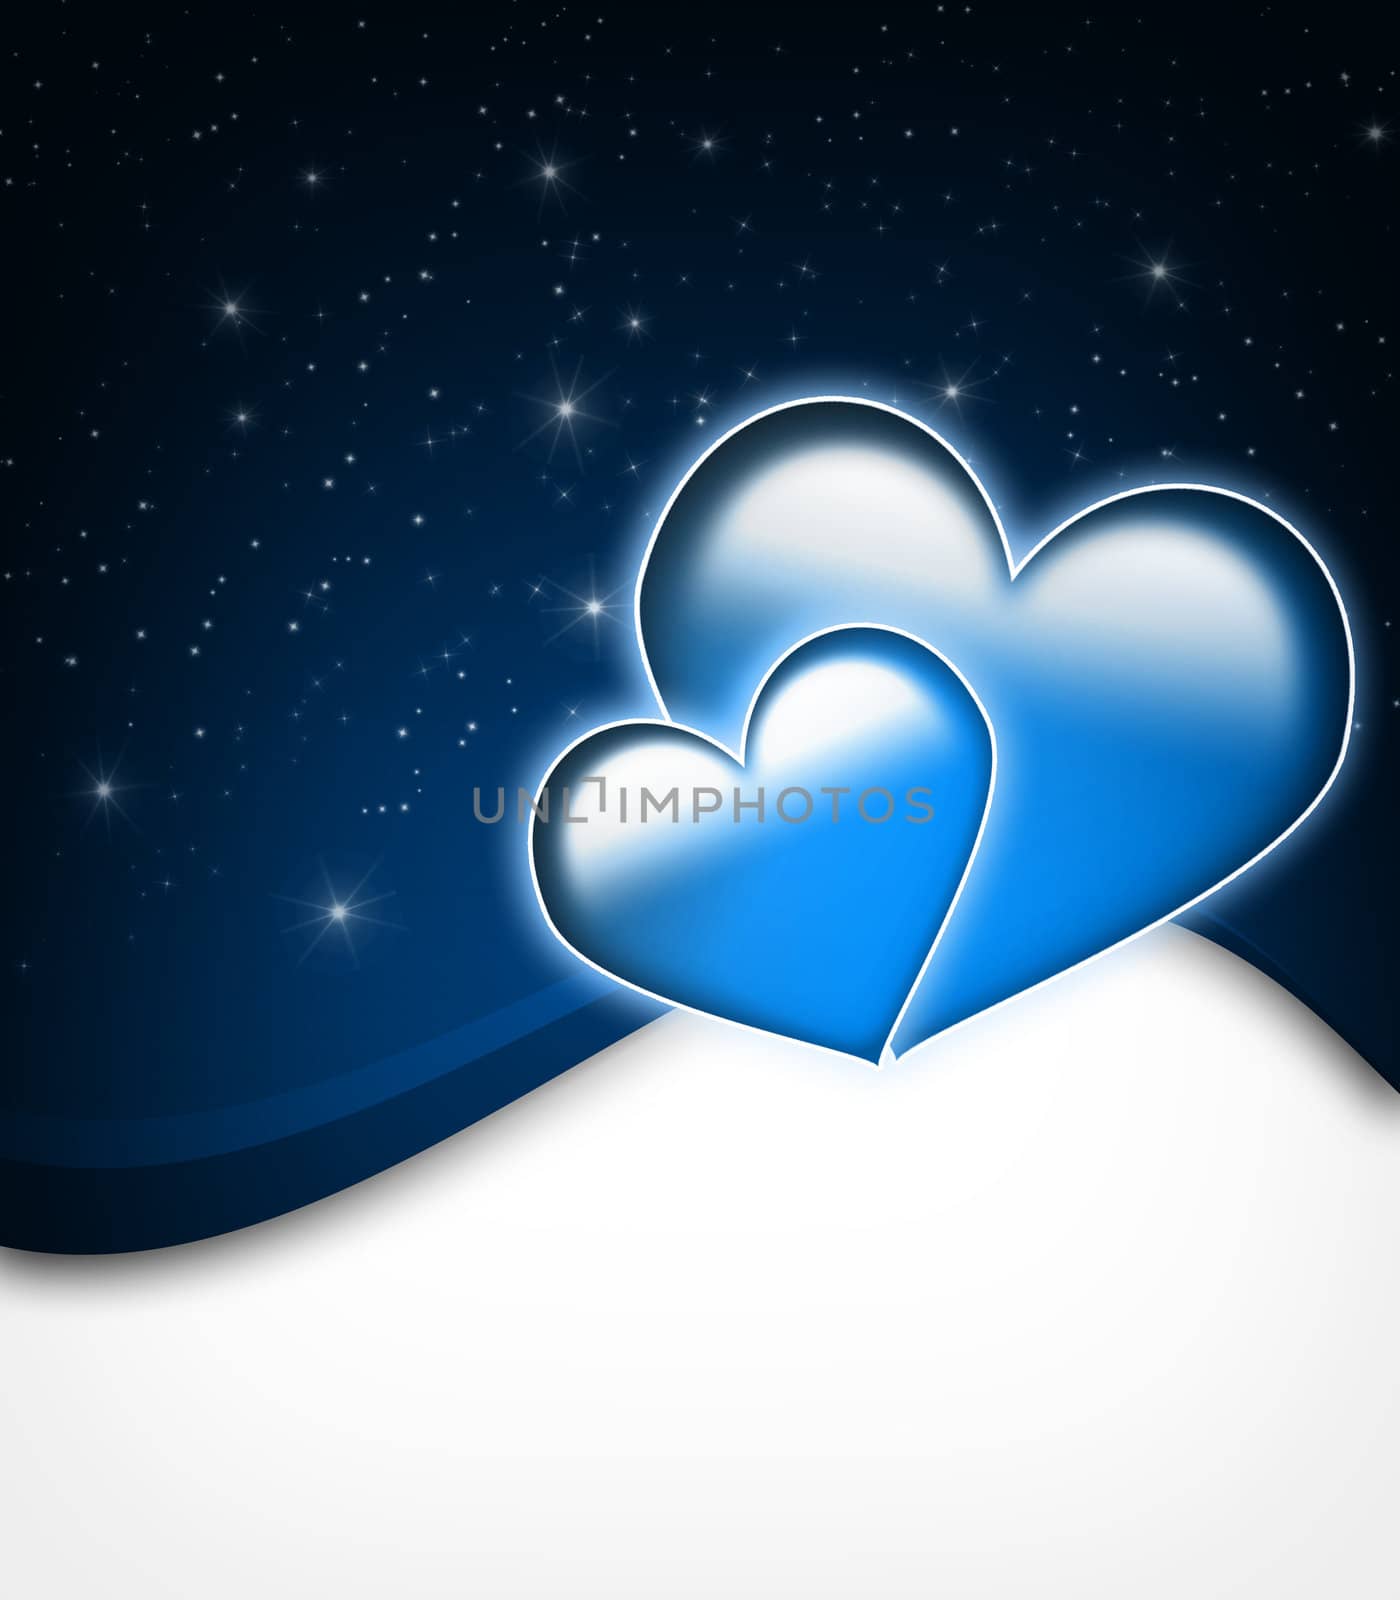 Valentines Day Card with  two big hearts and stars - all in blue